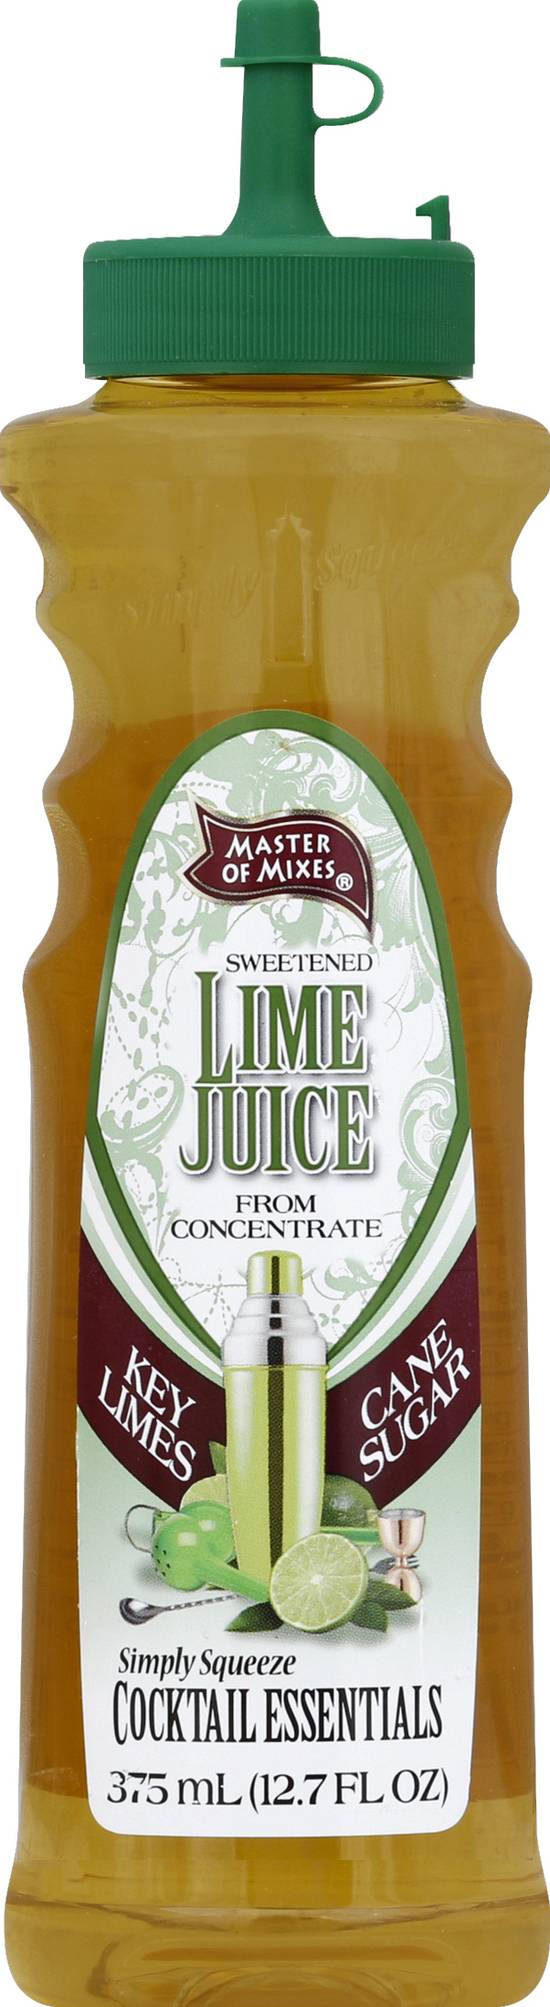 Master Of Mixes Cocktail Essentials Sweetened Lime Juice (12.7 fl oz)